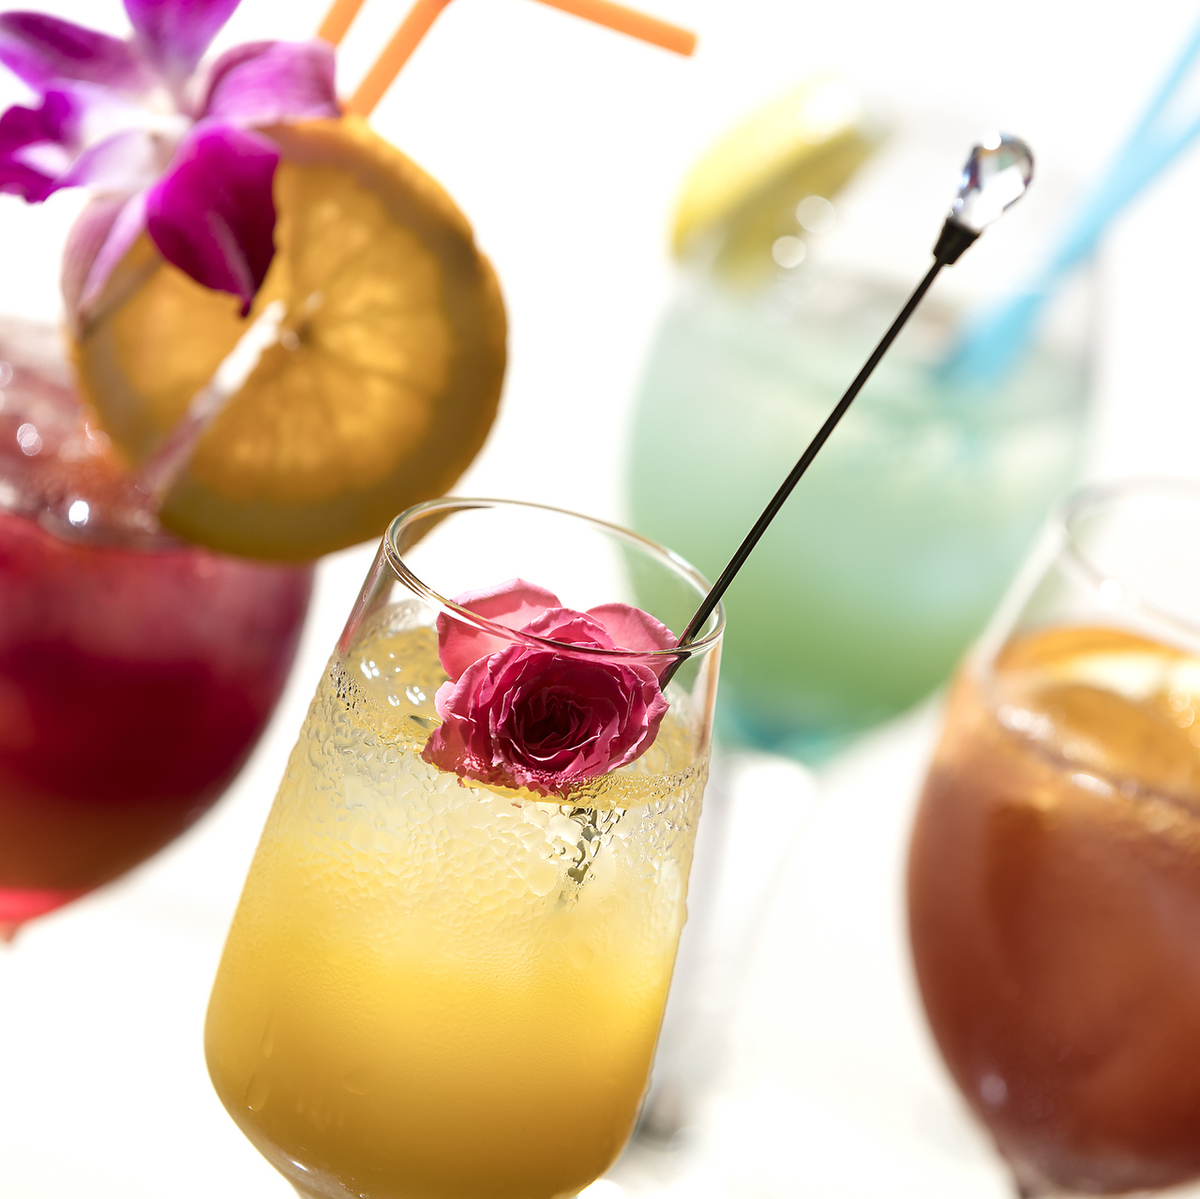 Why don't you try to make more than 200 kinds of drinks cool as bartenders?